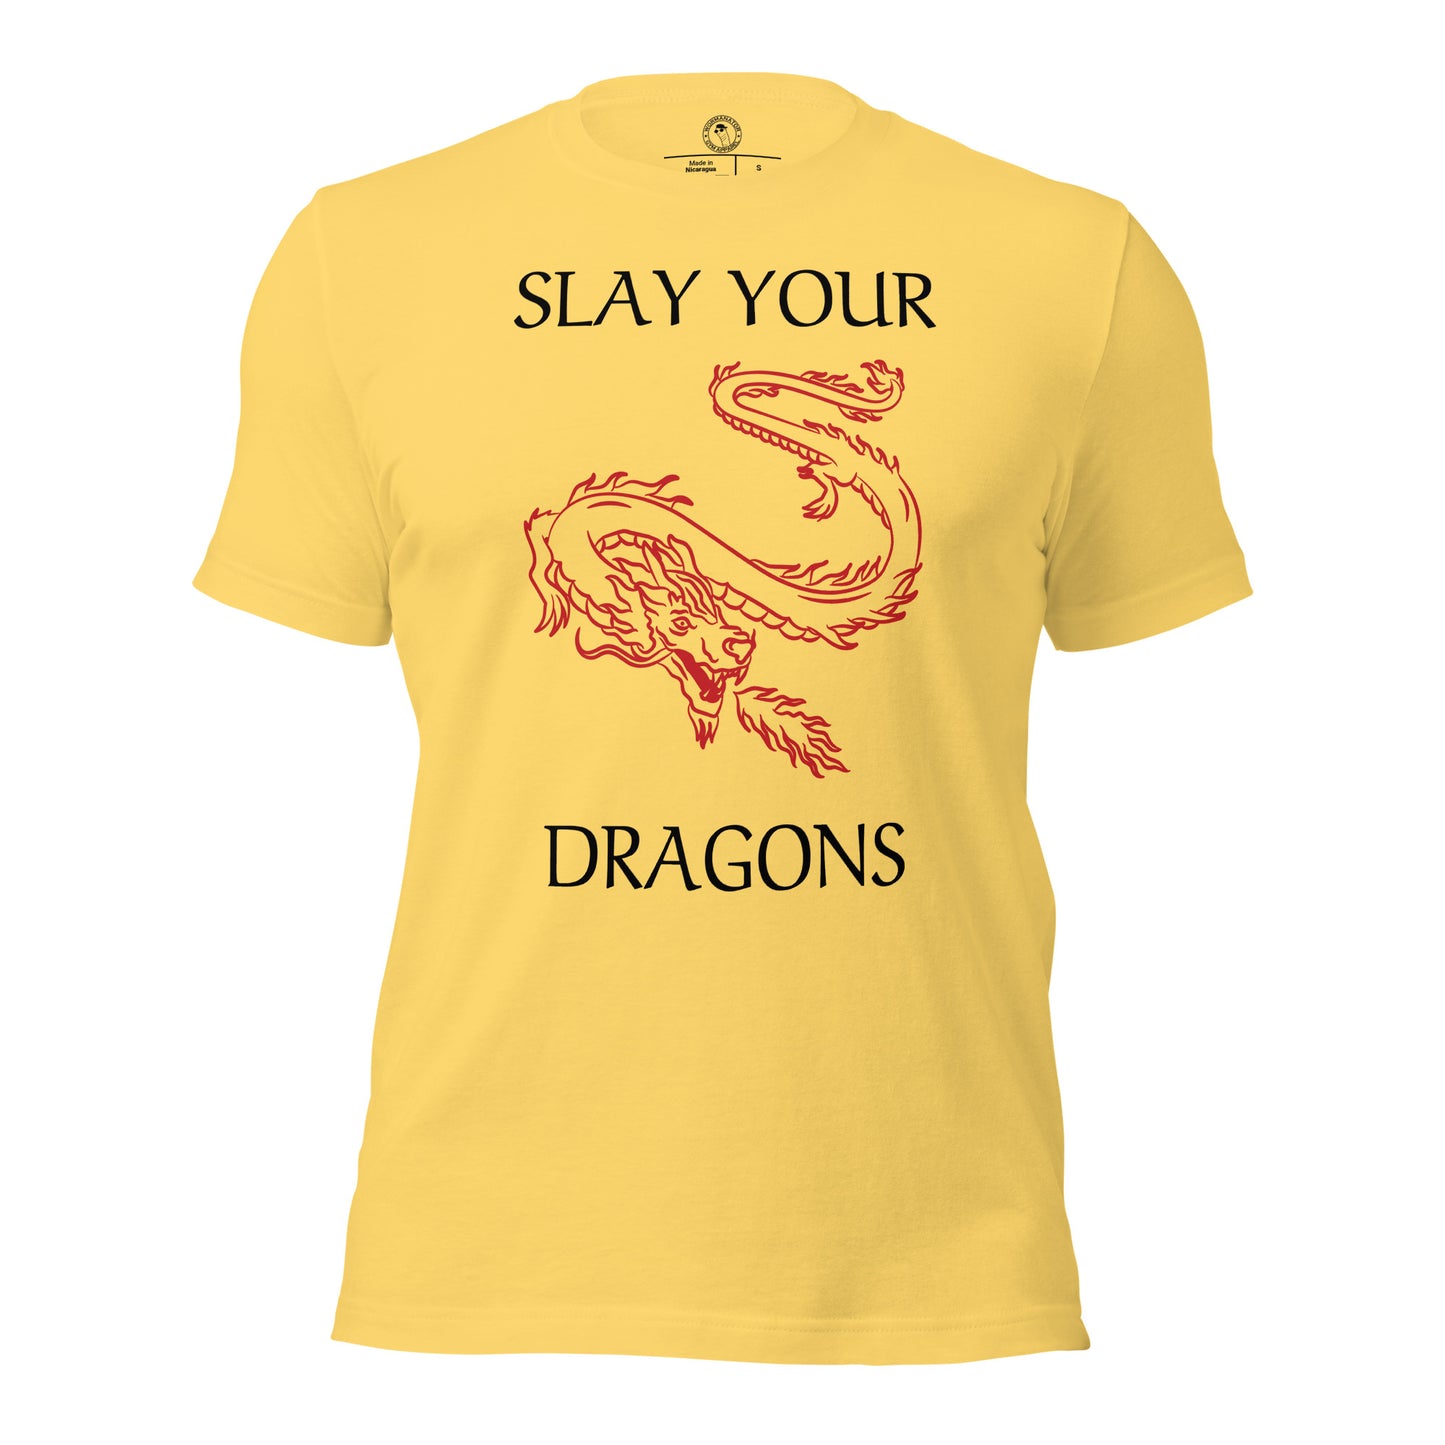 Slay Your Dragons Shirt in Yellow